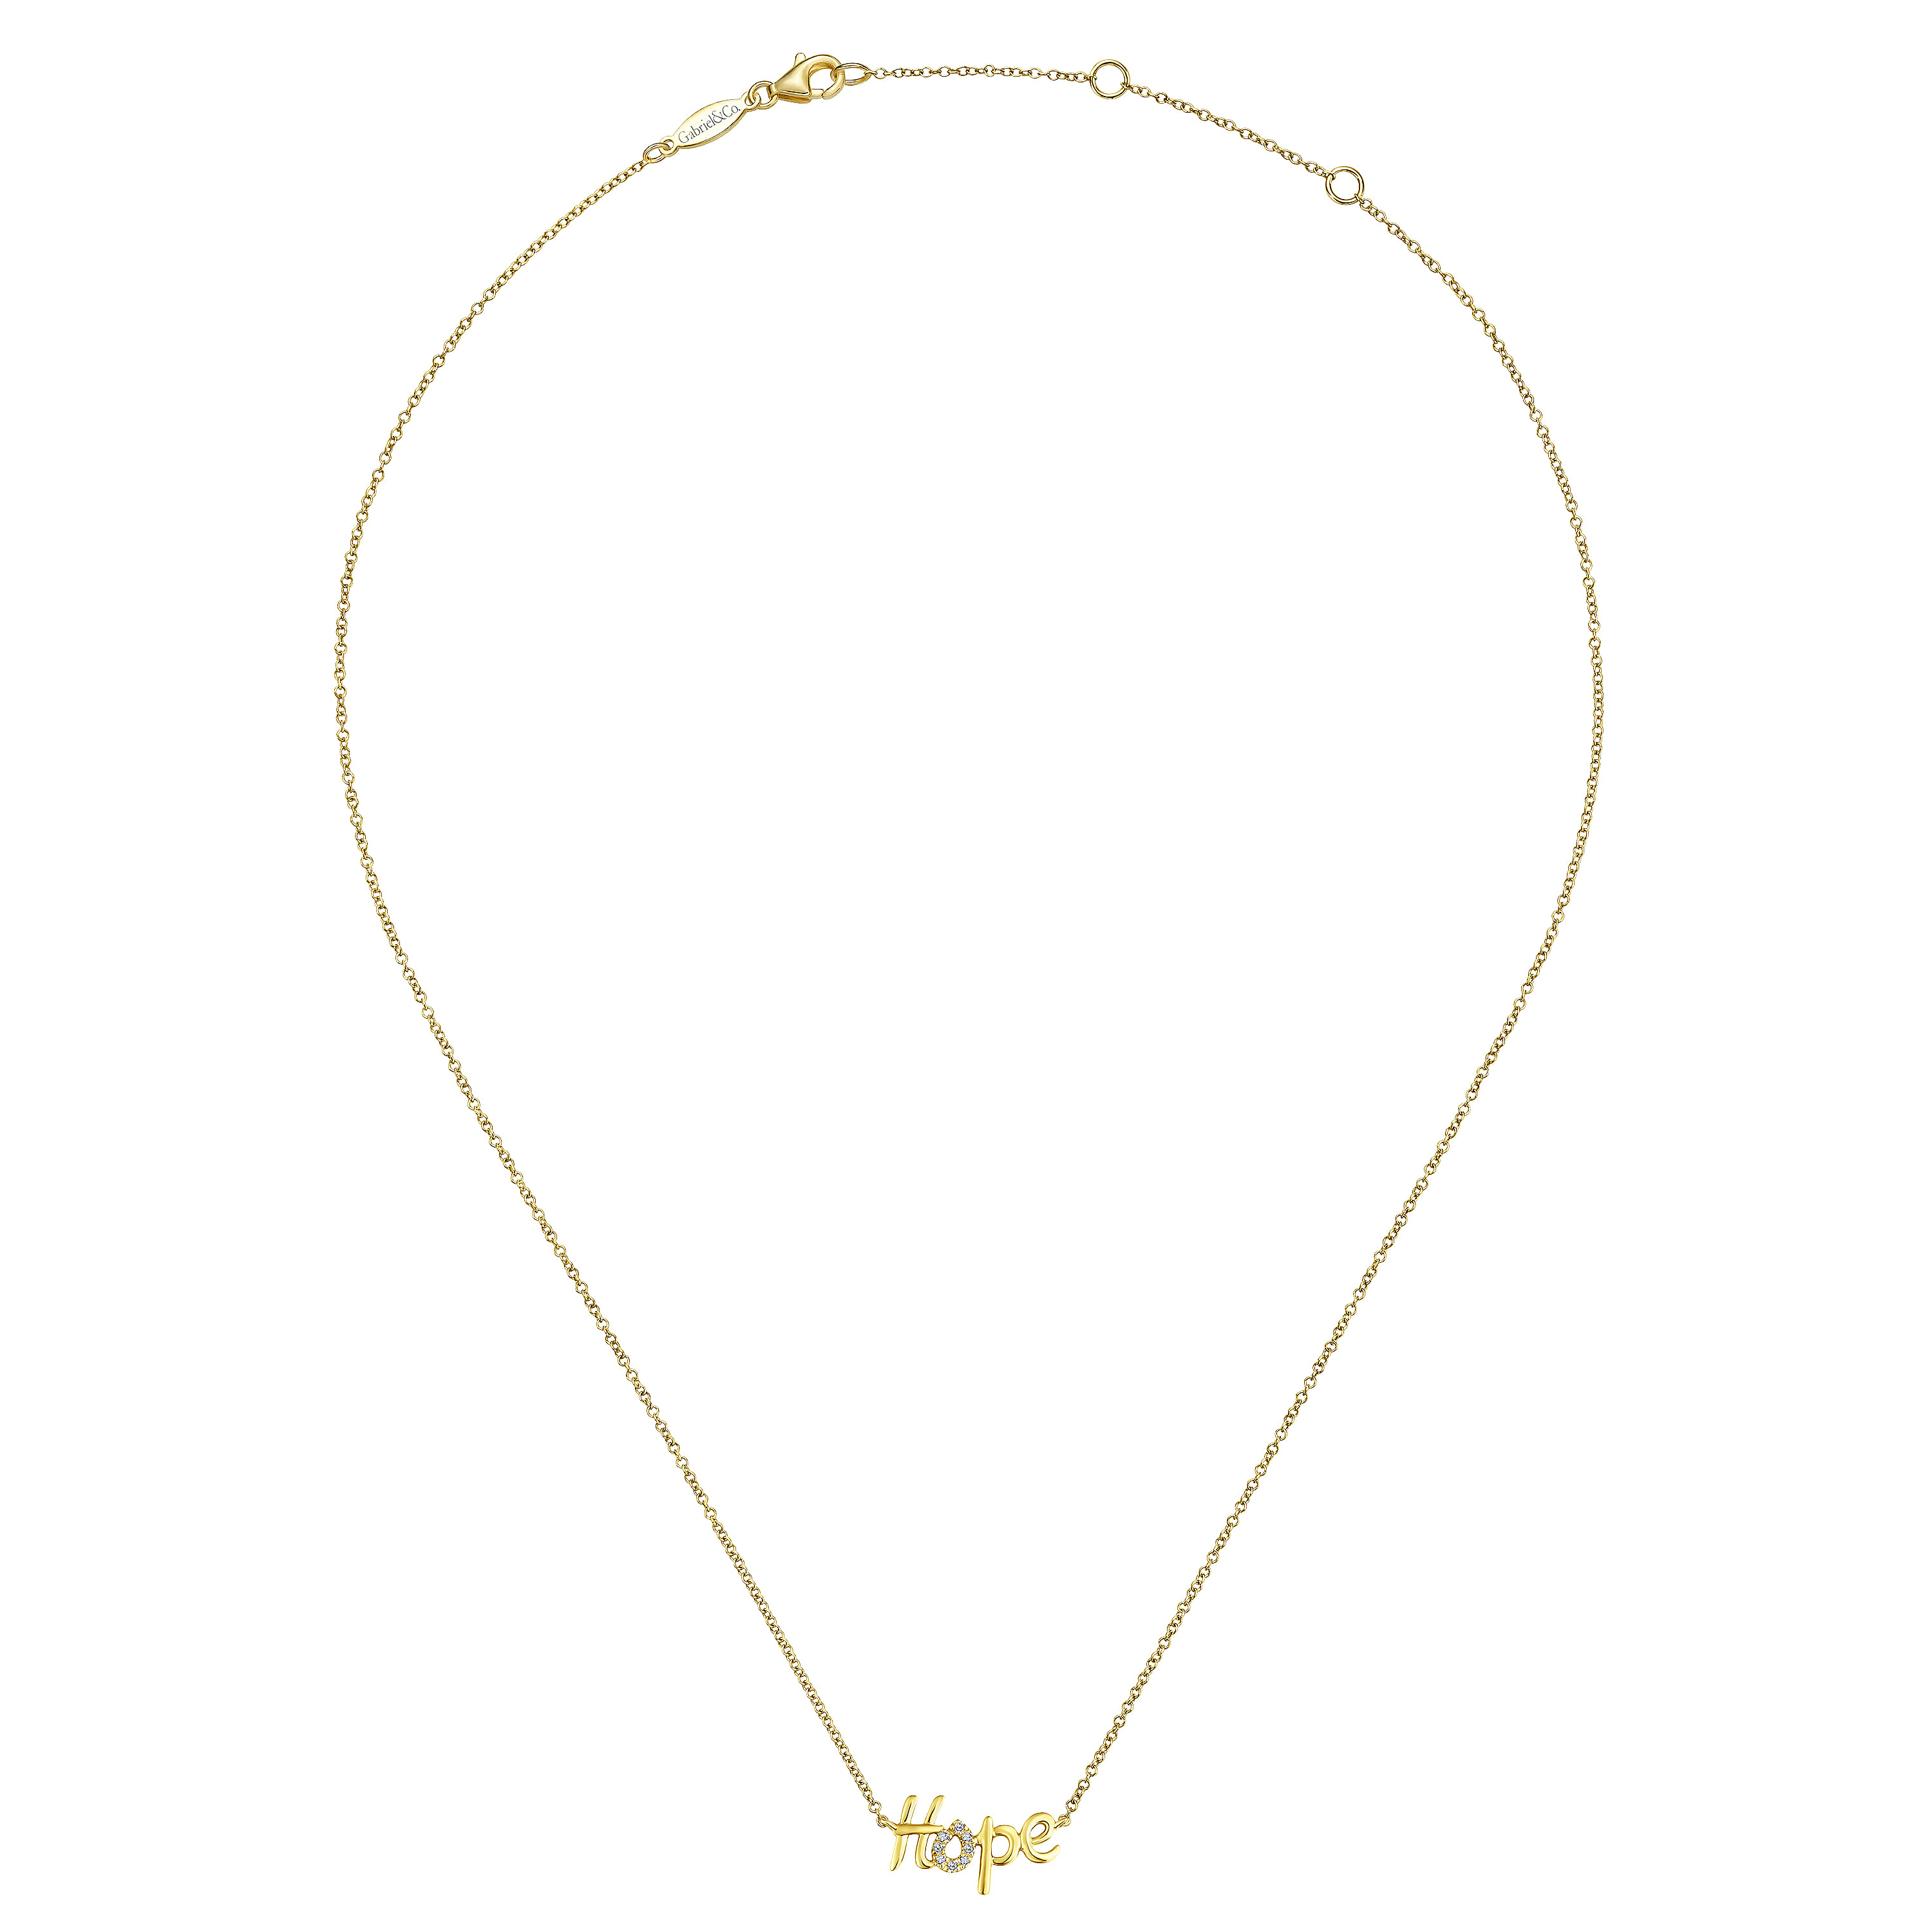 14K-Yellow-Gold-Hope-Necklace-with-Diamond-Pave2